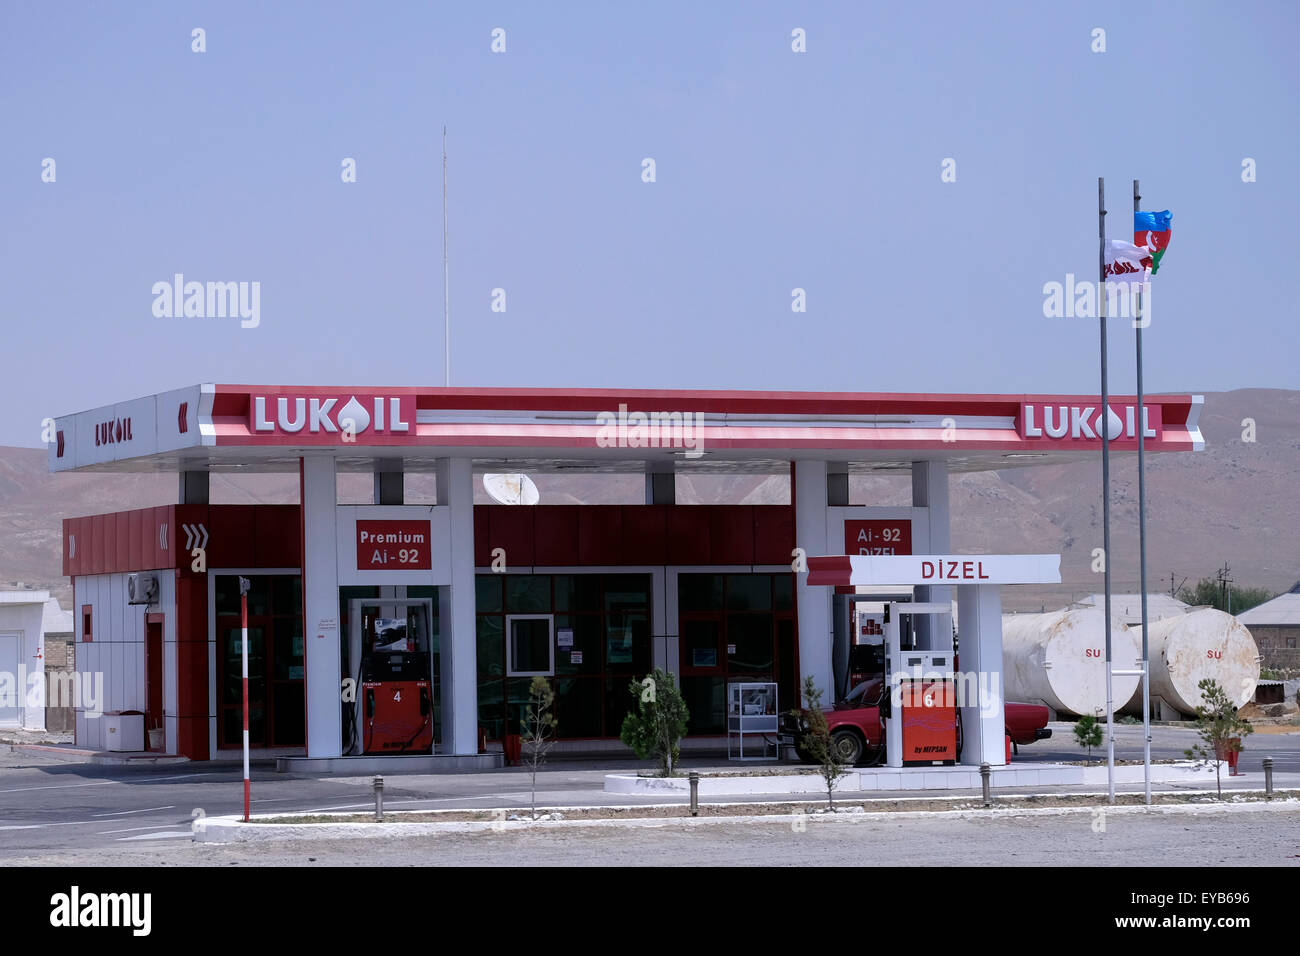 Lukoil gasoline station in Azerbaijan. The PJSC Lukoil Oil Company stylized as LUKOIL is a Russian multinational energy corporation specializing in the business of extraction, production, transport, and sale of petroleum, natural gas, and petroleum products. Stock Photo